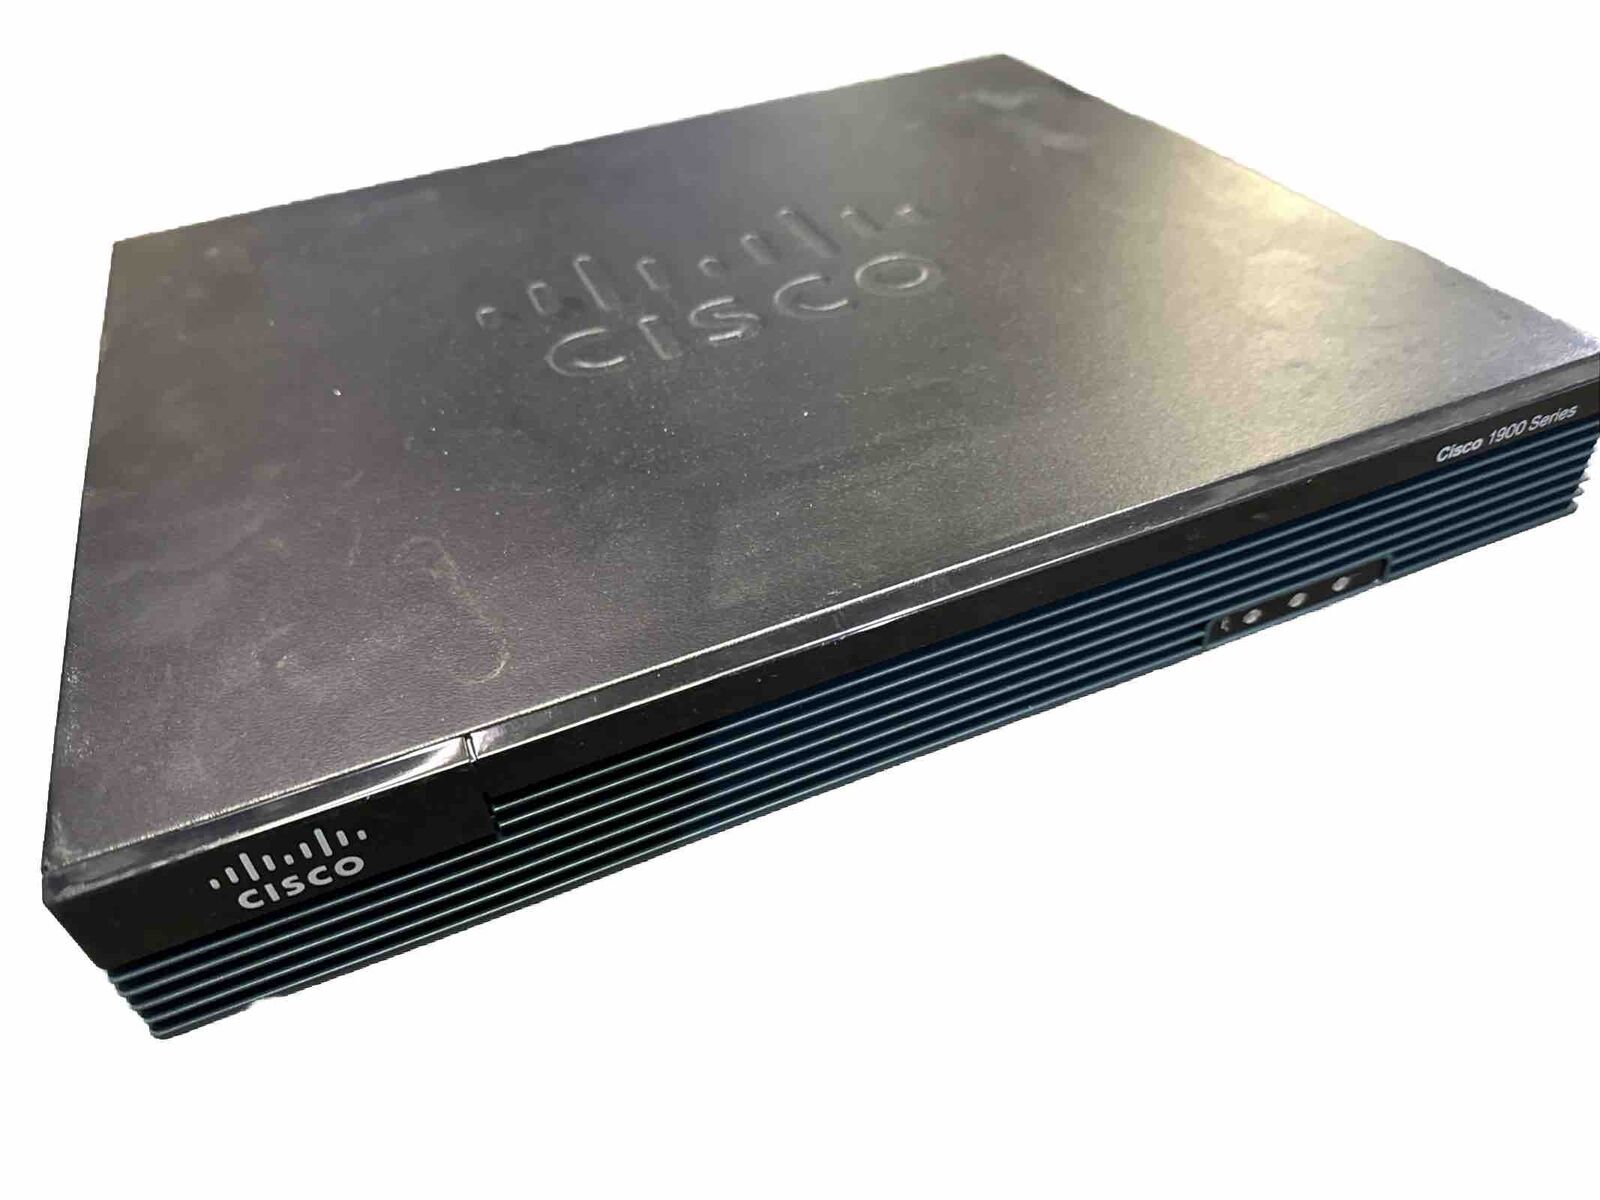 Cisco 1900 Series Model Cisco 1921 Integrated Services Router